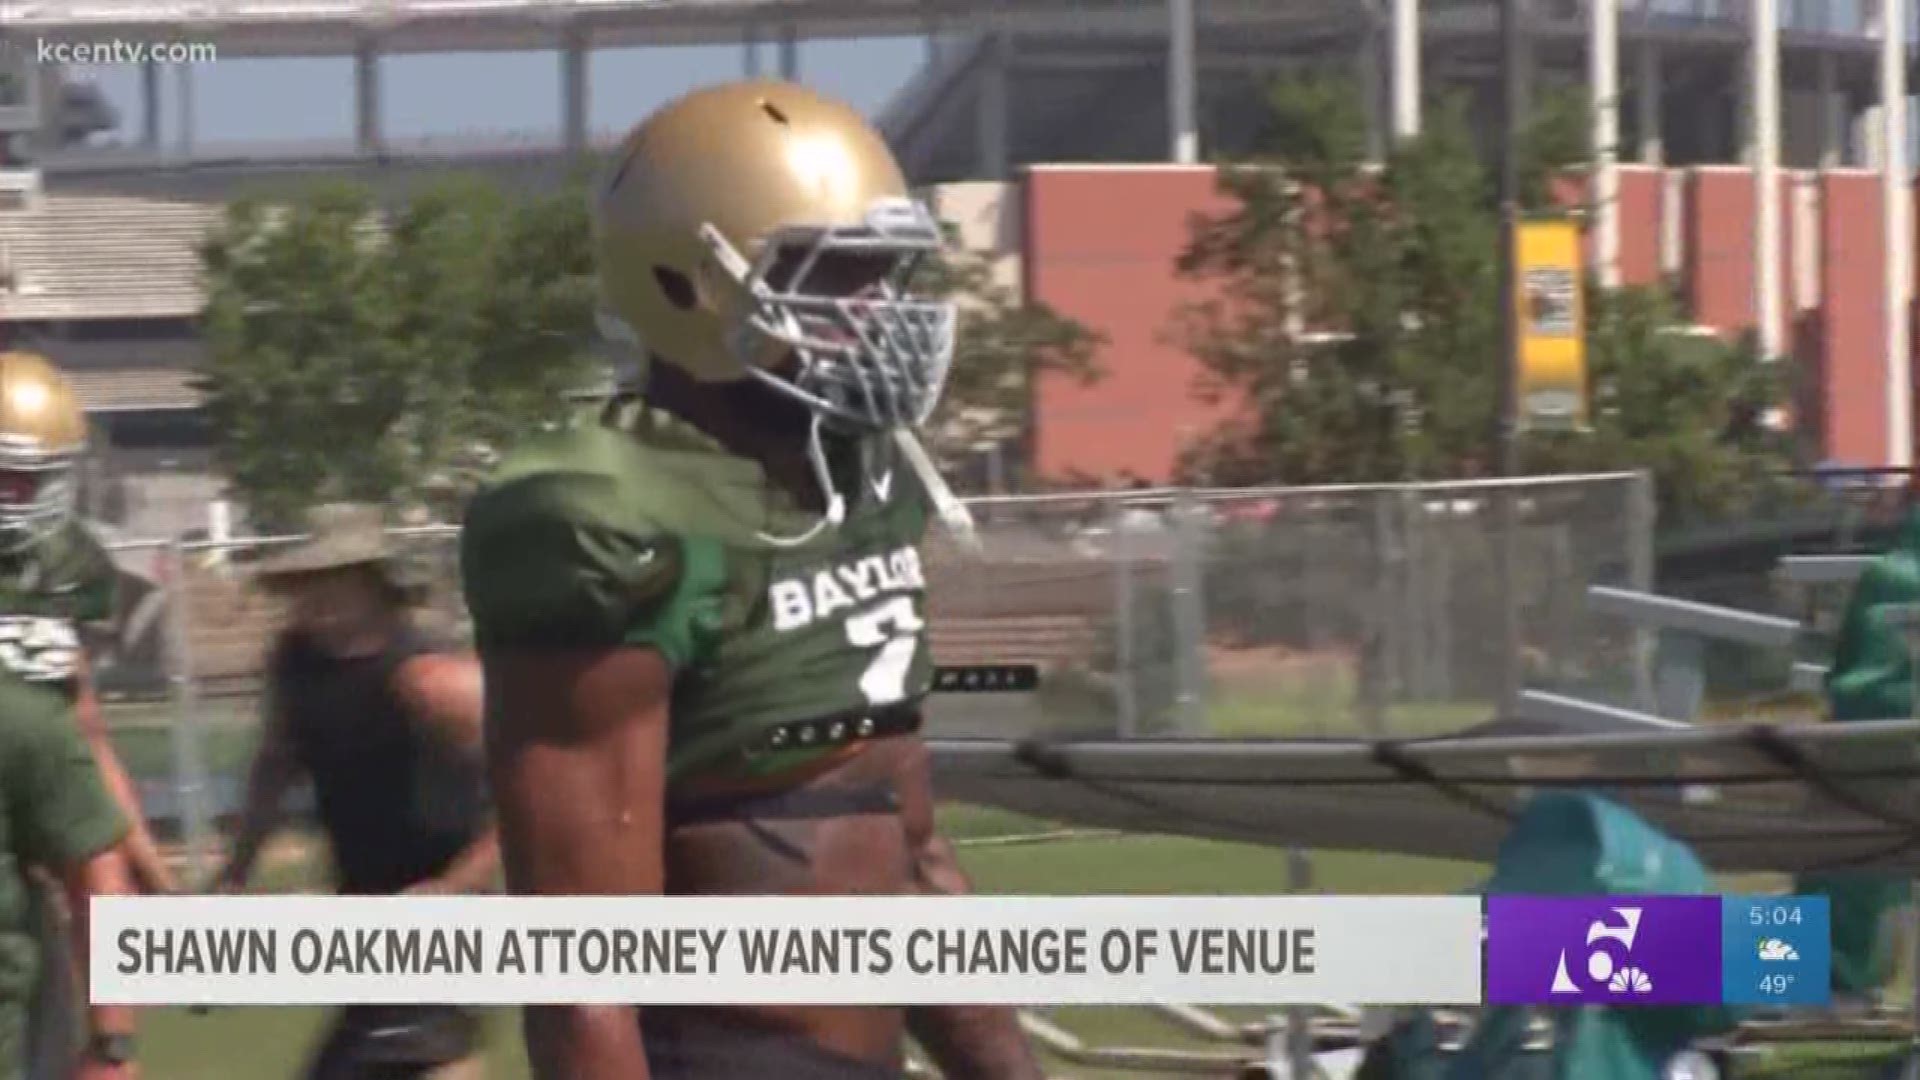 Oakman's attorney says that media coverage surrounding the 2016 Baylor Football sexual assault scandal and the recent Jacob Anderson case makes it difficult for his client to have a fair trial in McLennan County.